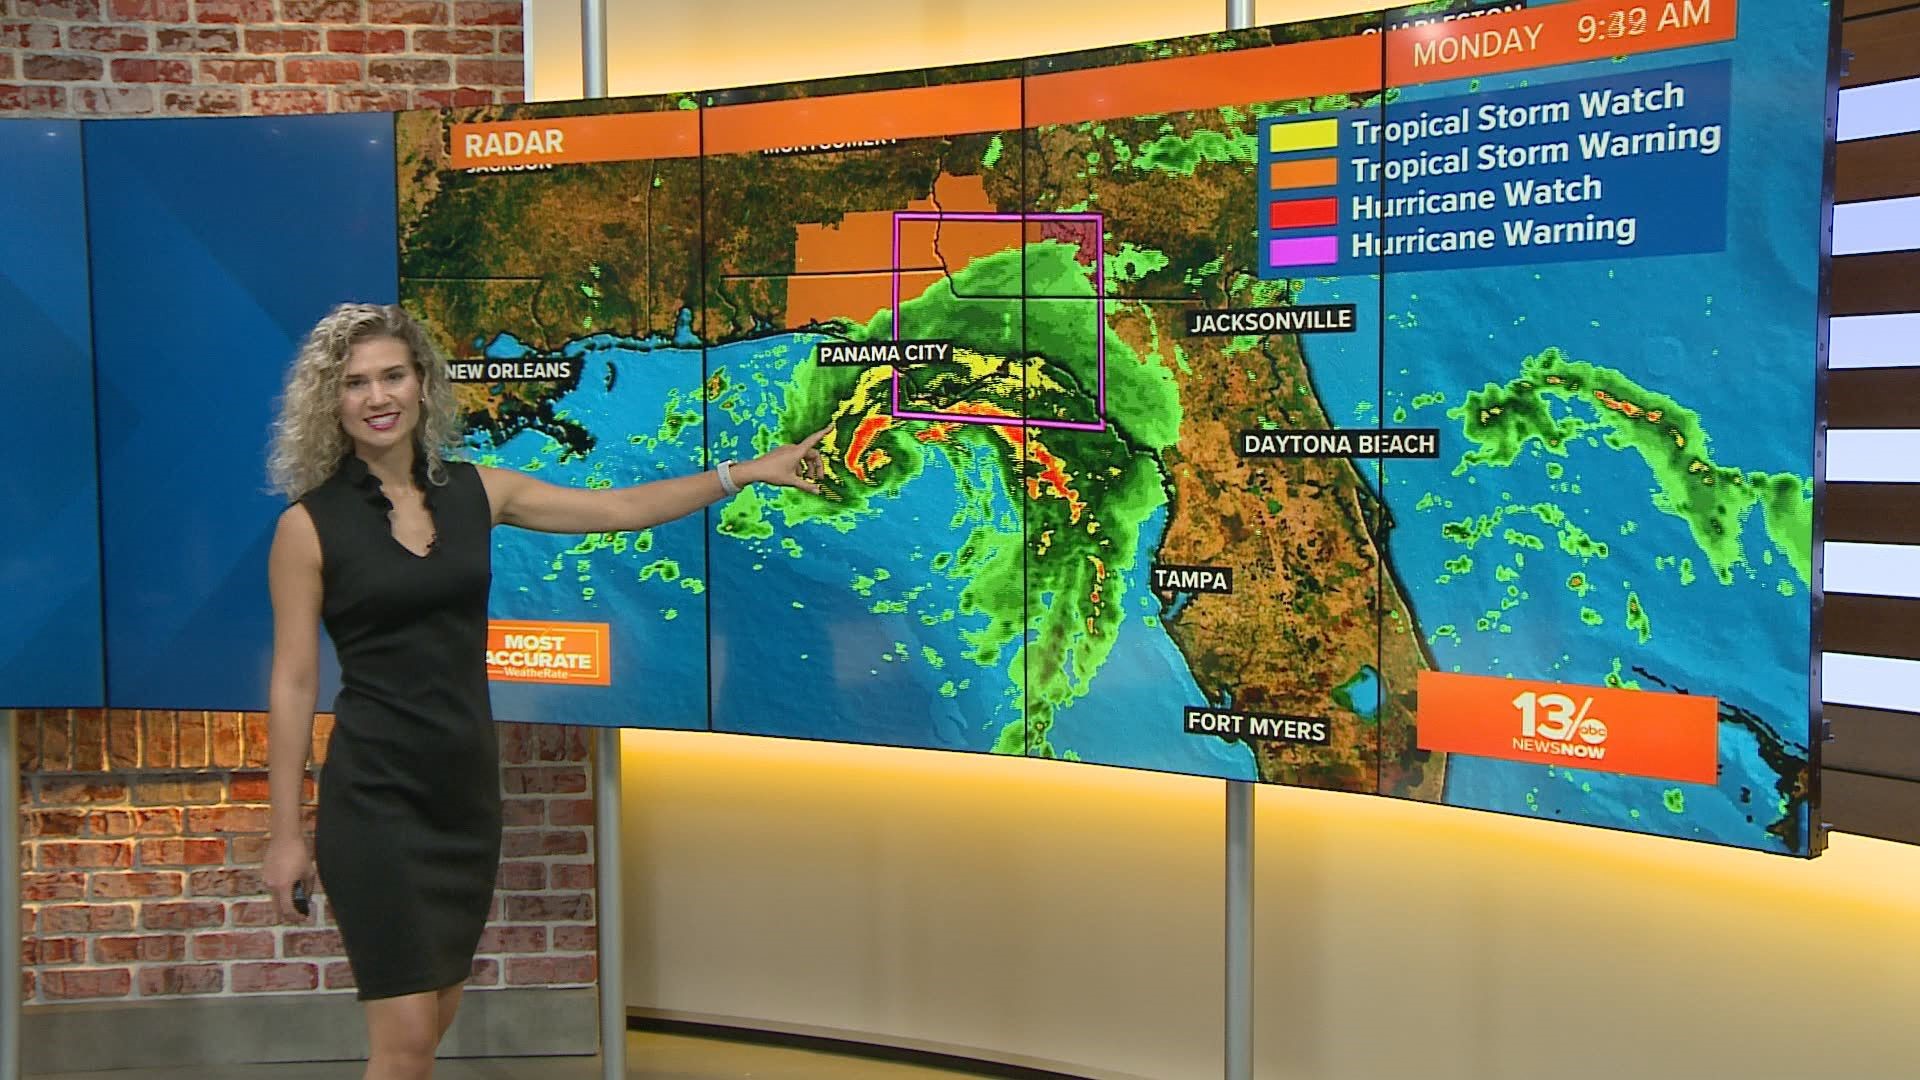 13News Now meteorologist Payton Domschke gives the latest update on Tropical Storm Fred as it nears landfall in the Florida Panhandle.